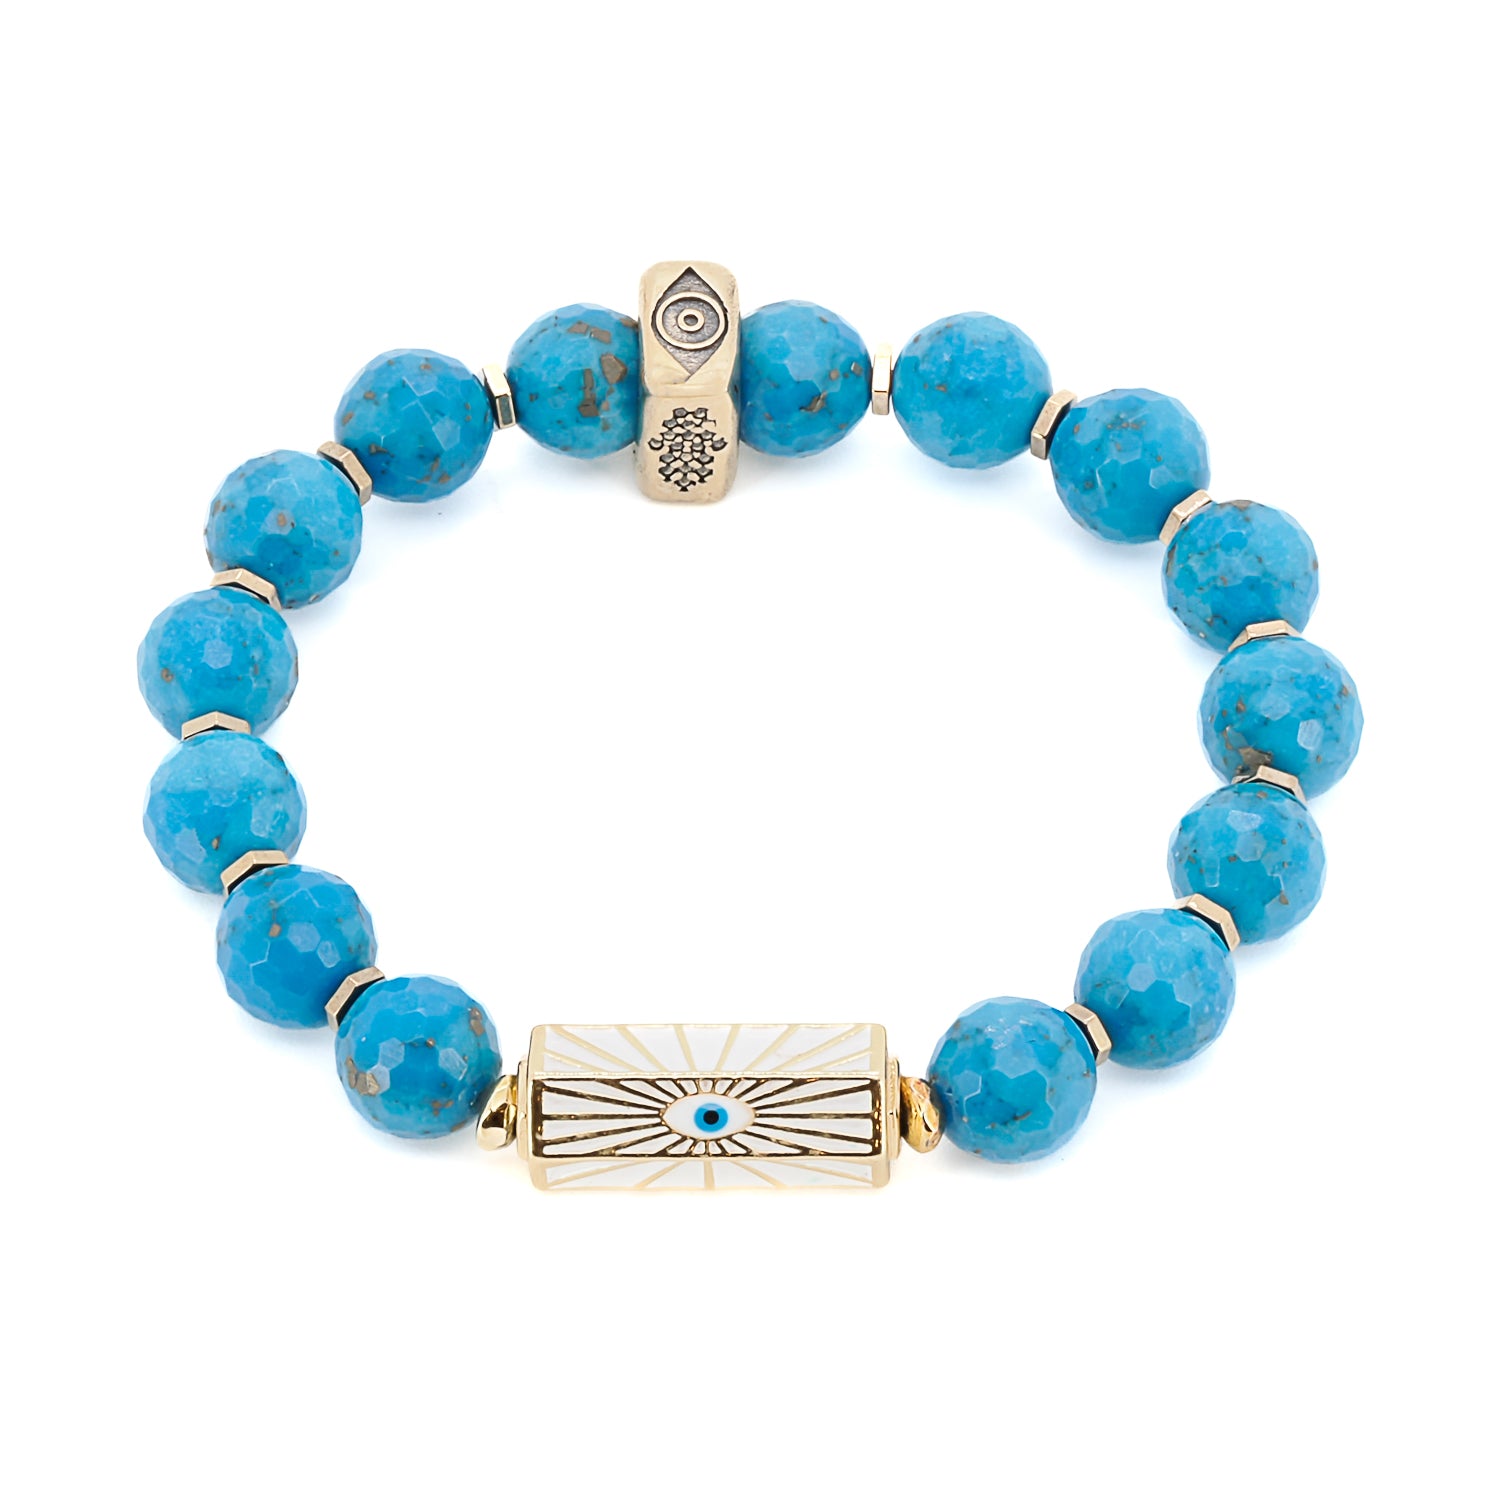 Embrace luck and protection with the Turquoise Luck and Protection Bracelet, a stunning handmade jewelry piece.